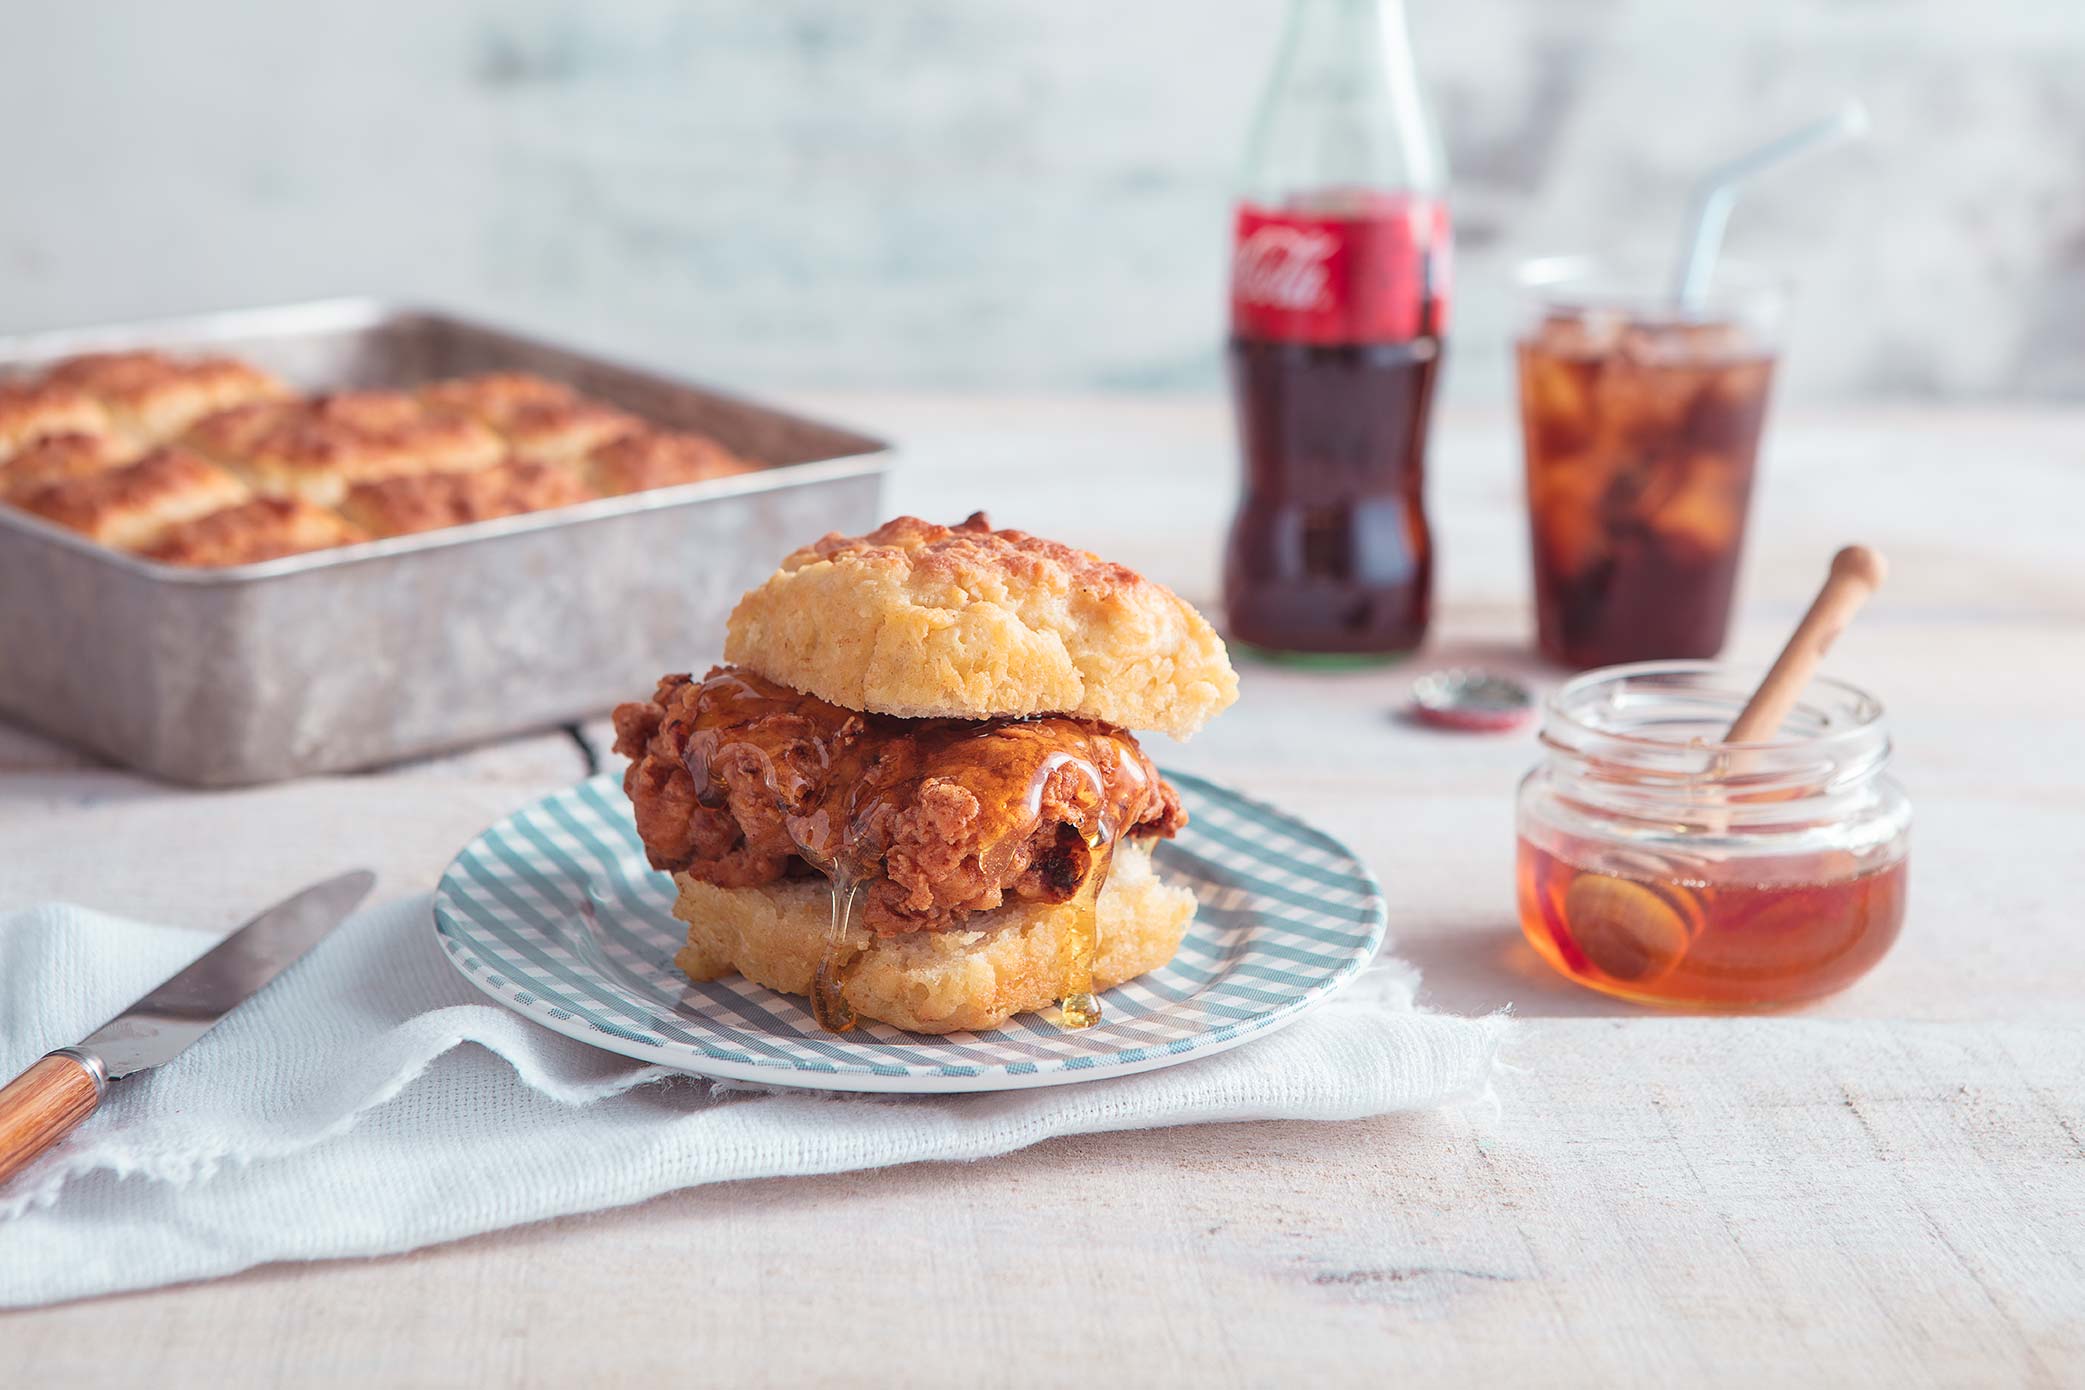 Fried Chicken And Biscuit with rosemary honey photographed with the Canon 24-70mm f2.8 Zoom